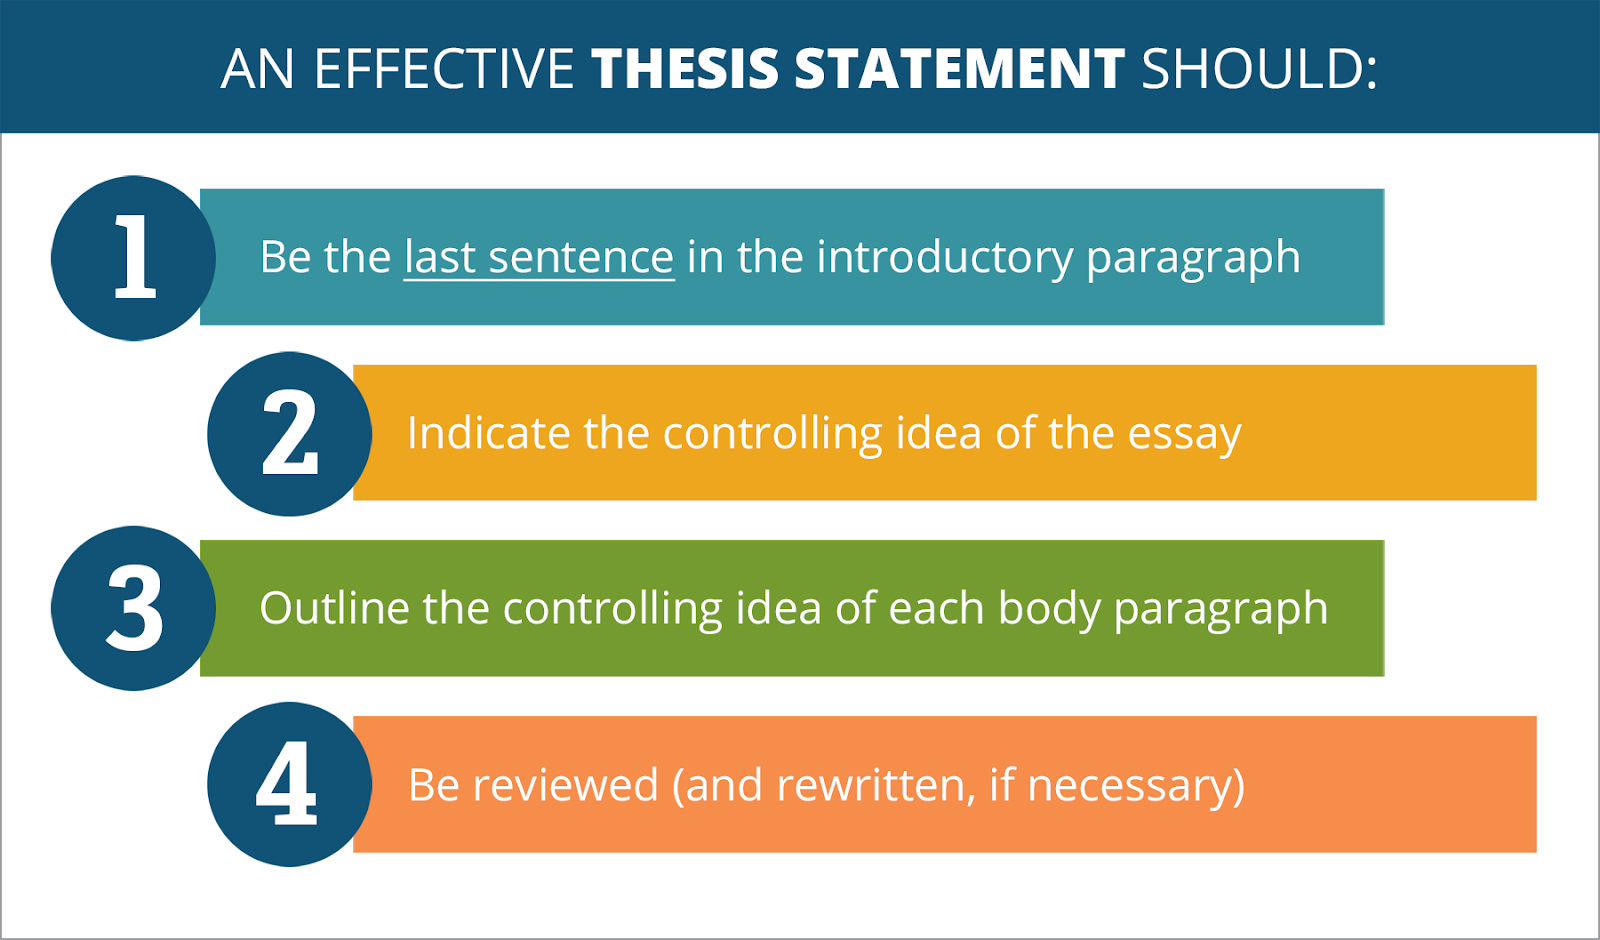 This is a chart of things an Effective Thesis Statement Should do. 1. Be the last sentence in the introductory paragraph. 2. Indicate the controlling idea of the essay. 3. Outline the controlling idea of each body paragraph. 4. Be reviewd and written if necessary.